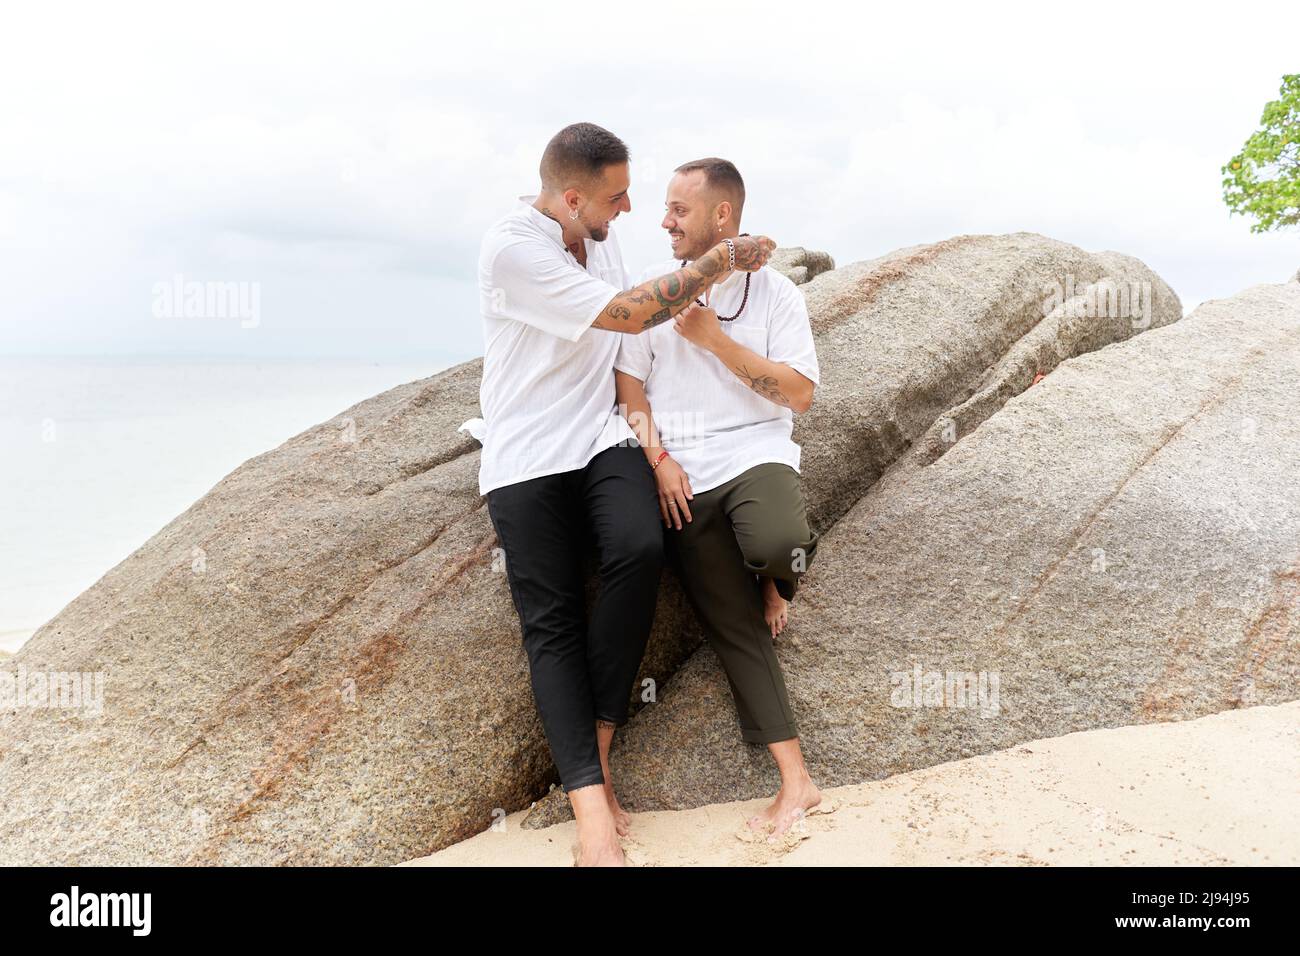 Homosexual man giving a ball necklace to his partner in a tropical beach Stock Photo